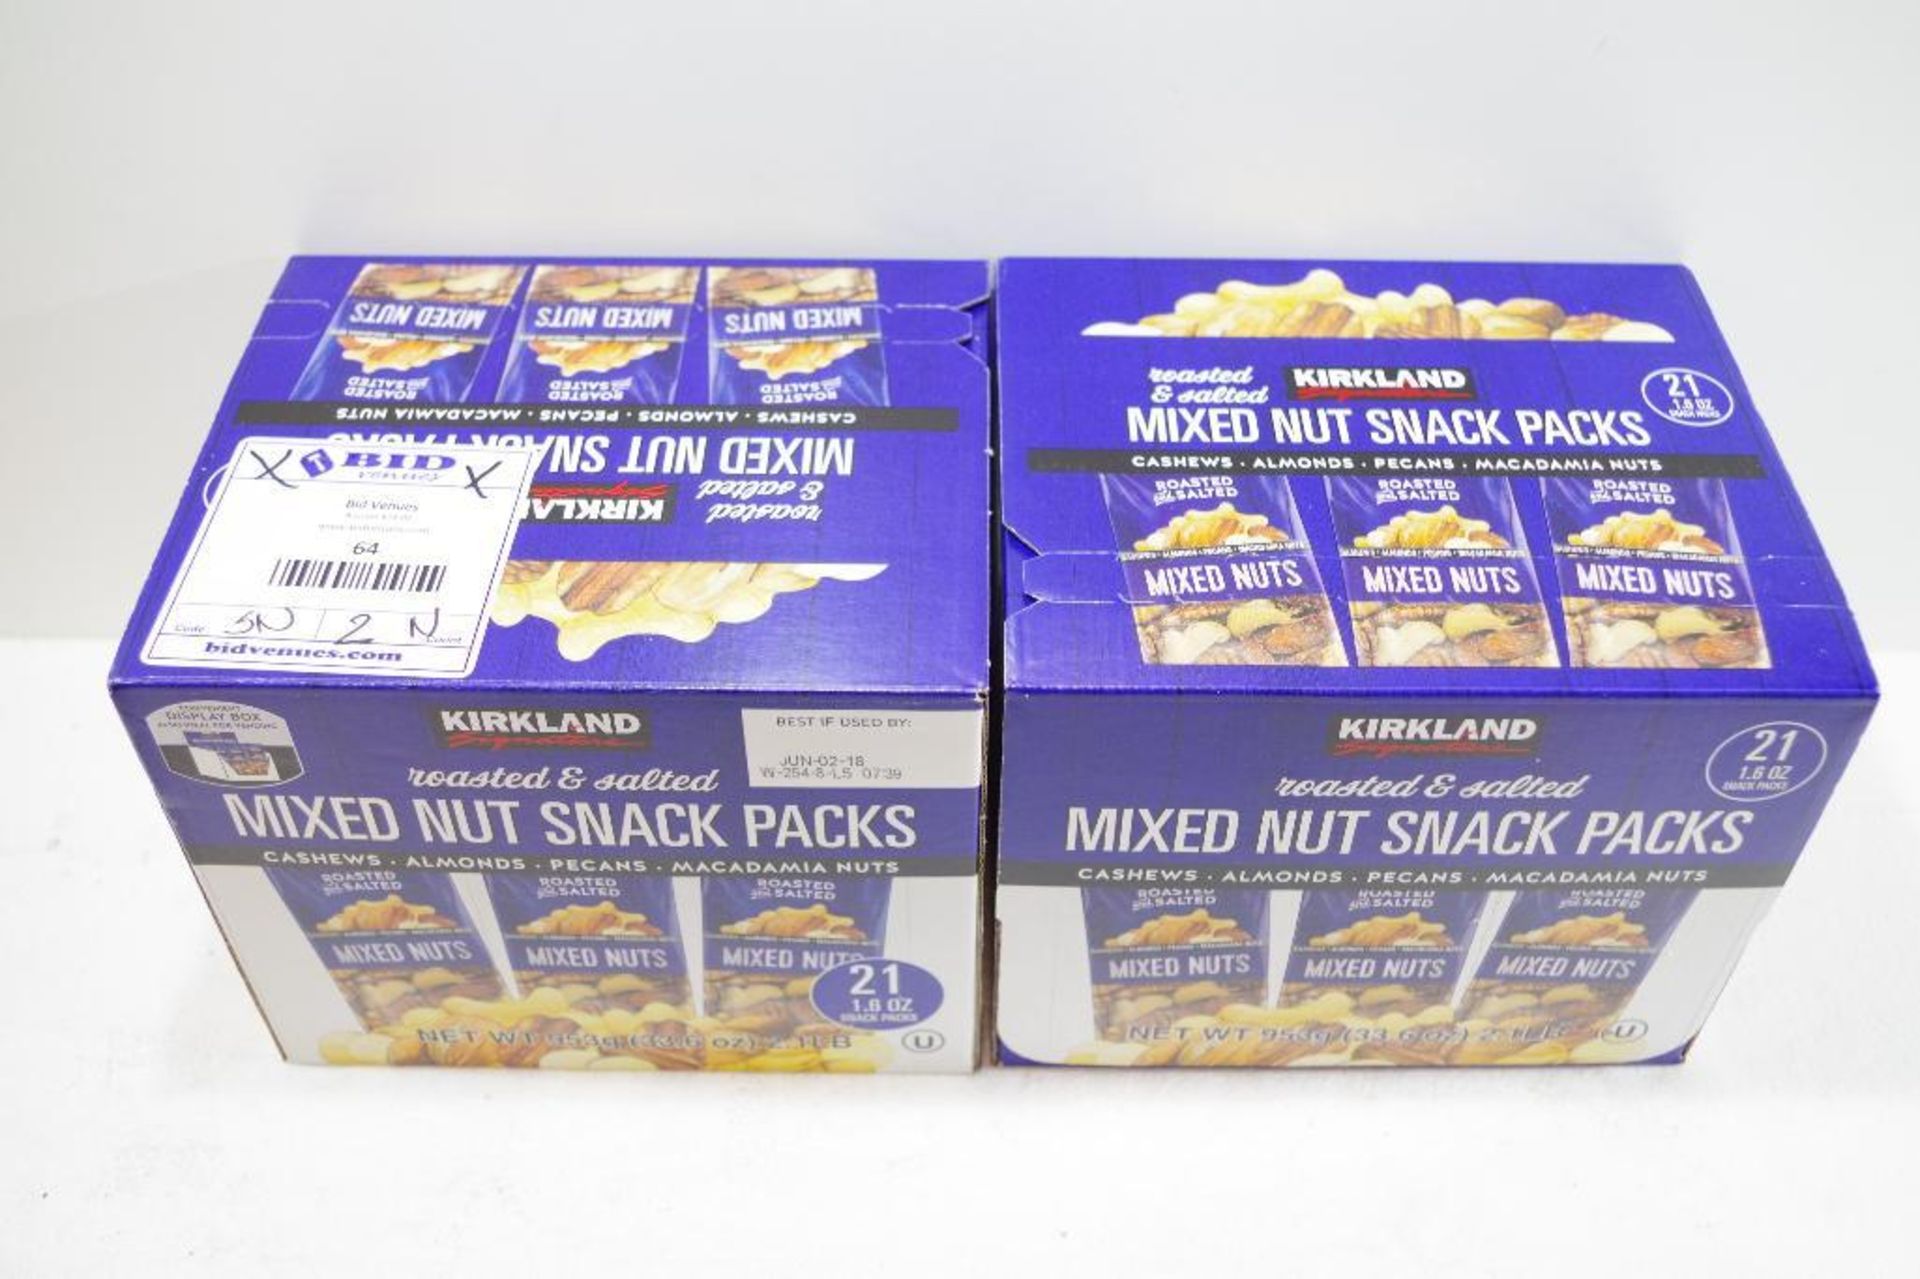 [2] KIRKLAND Roasted & Salted Mixed Nut Snack Boxes - Image 2 of 2